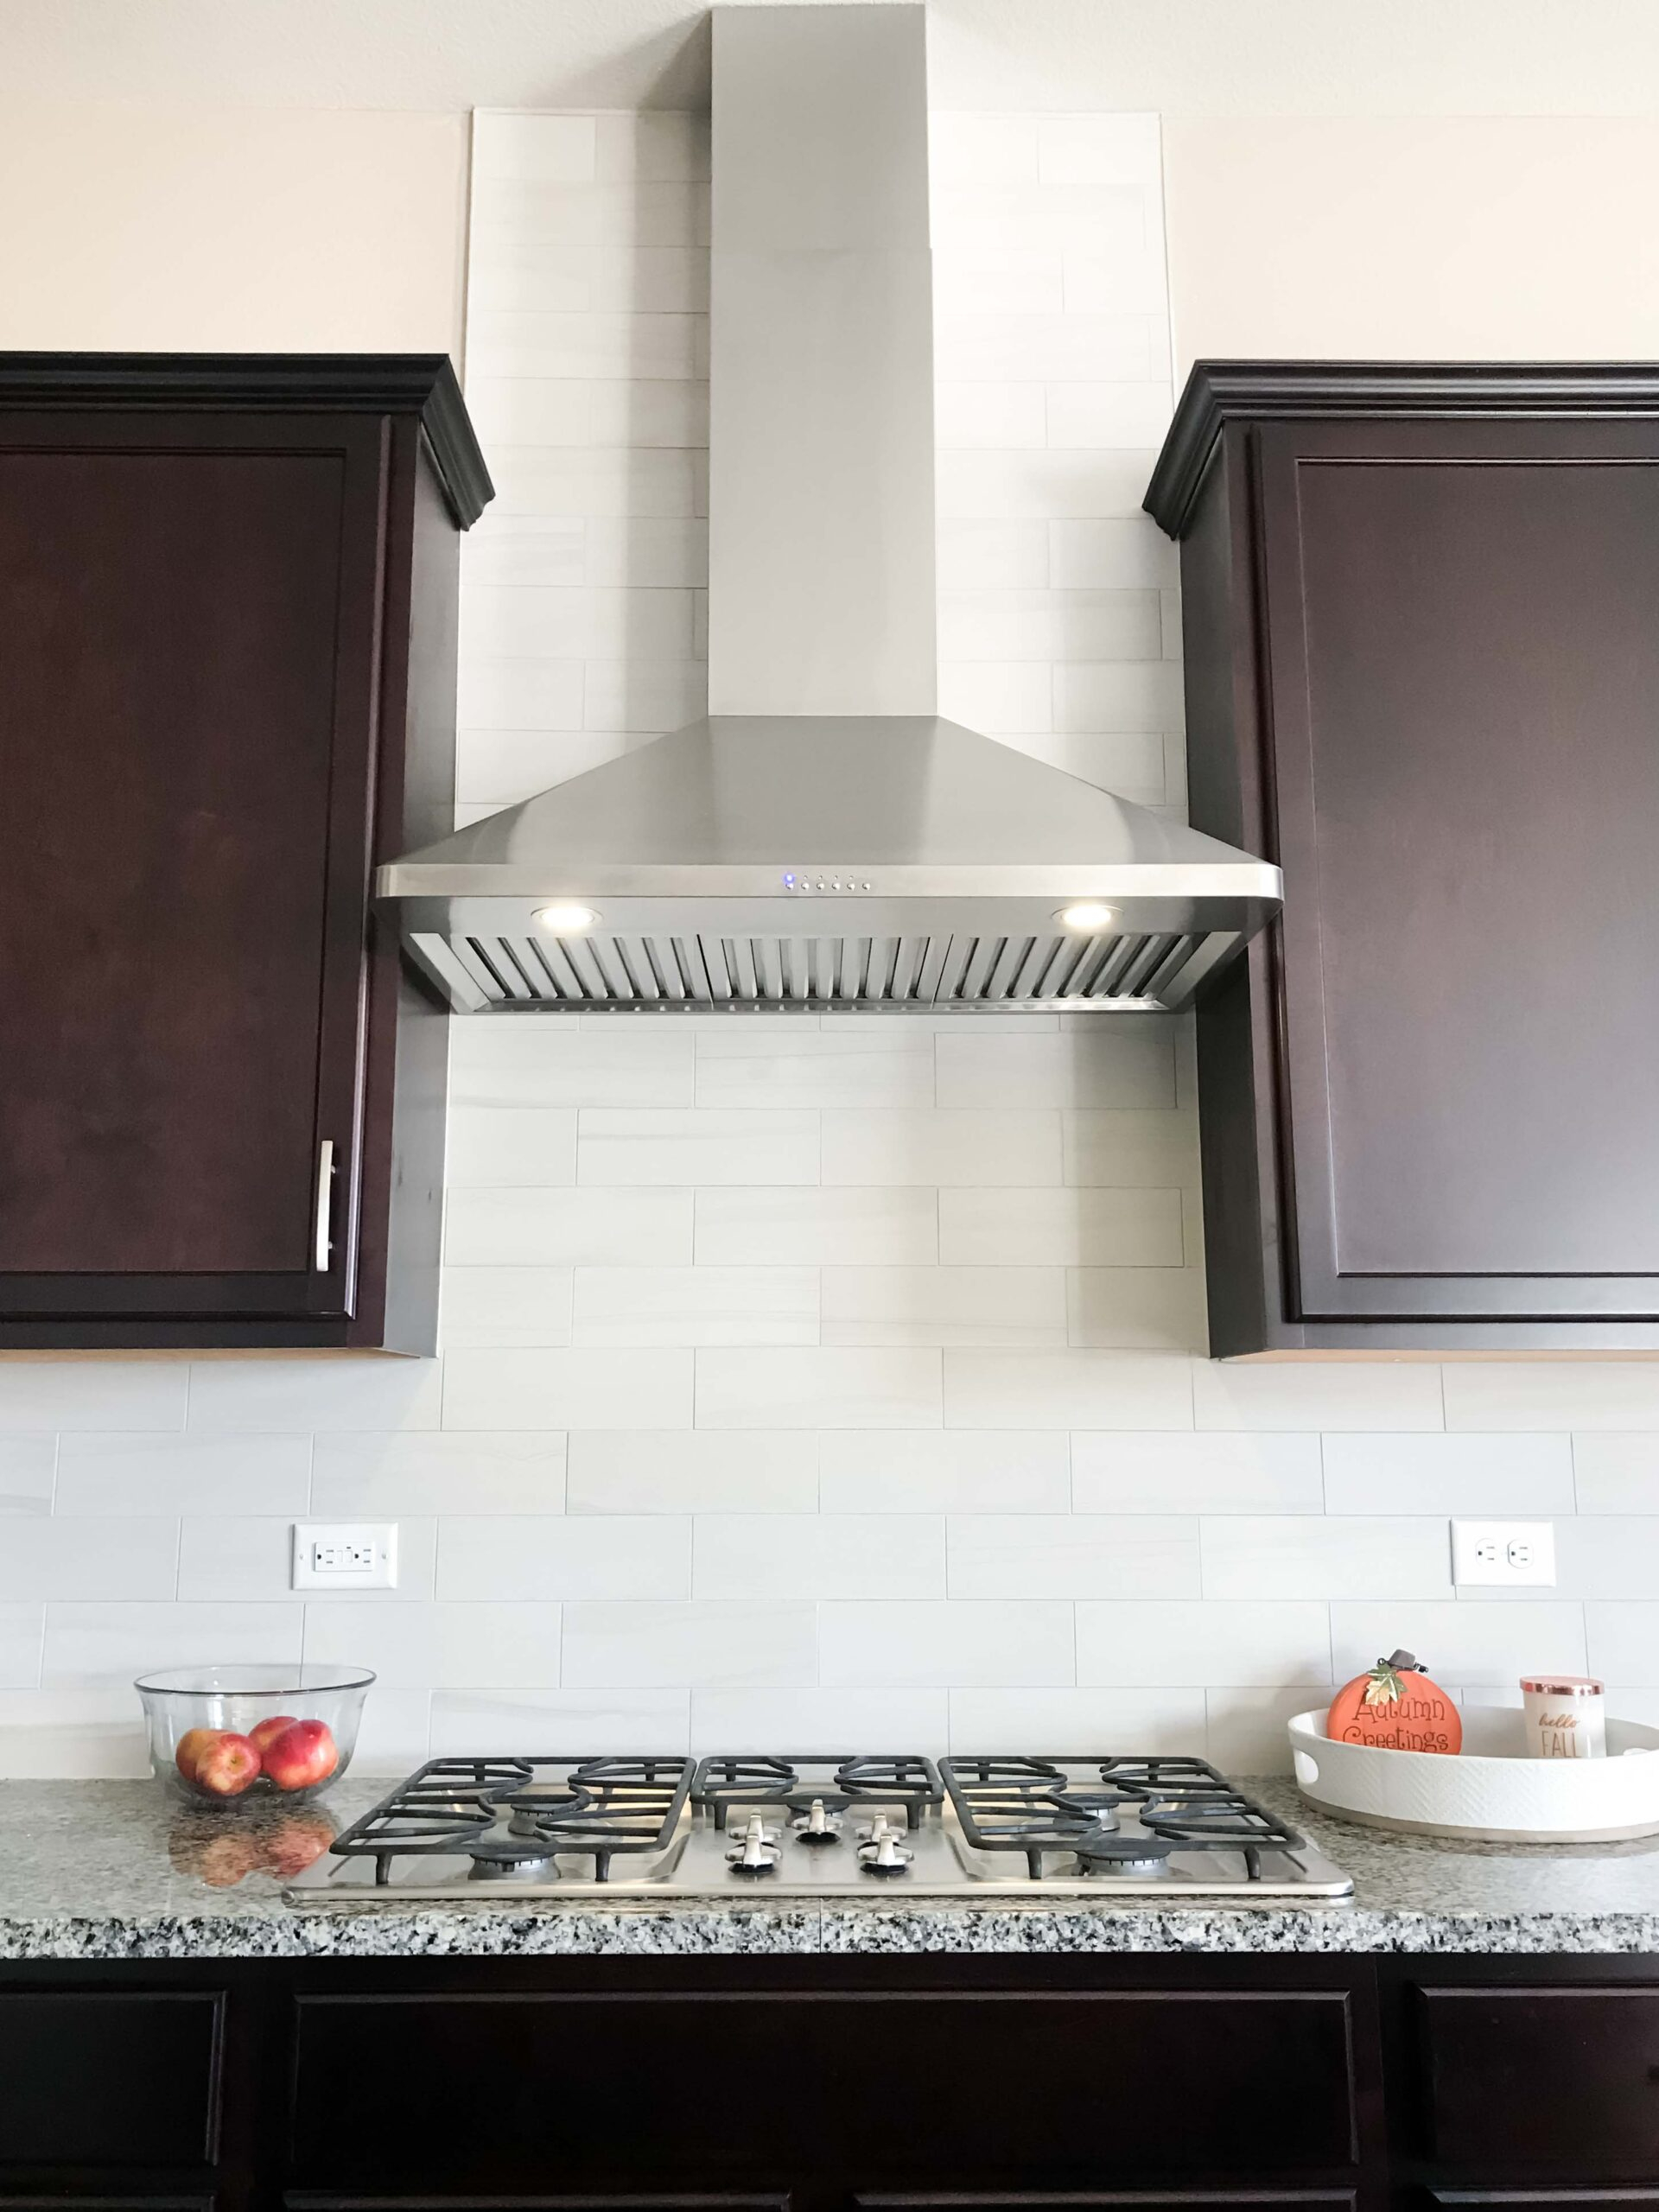 Clean Your Range Hood Blower In 10 Minutes Or Less pertaining to proportions 1920 X 2560